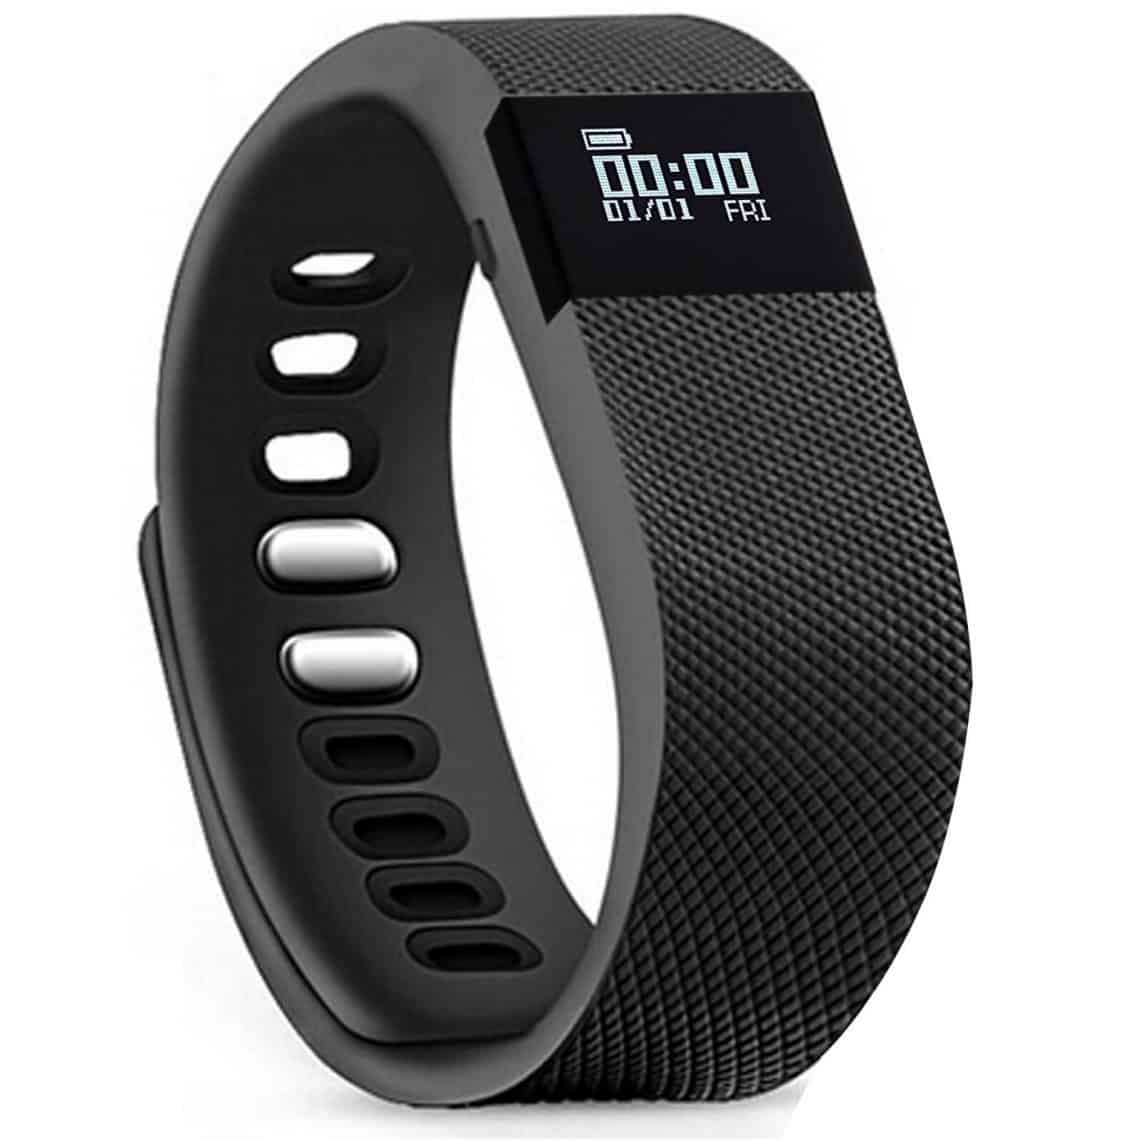 Best Fitness Watch For iPhone: Top Products and Expert's Reviews